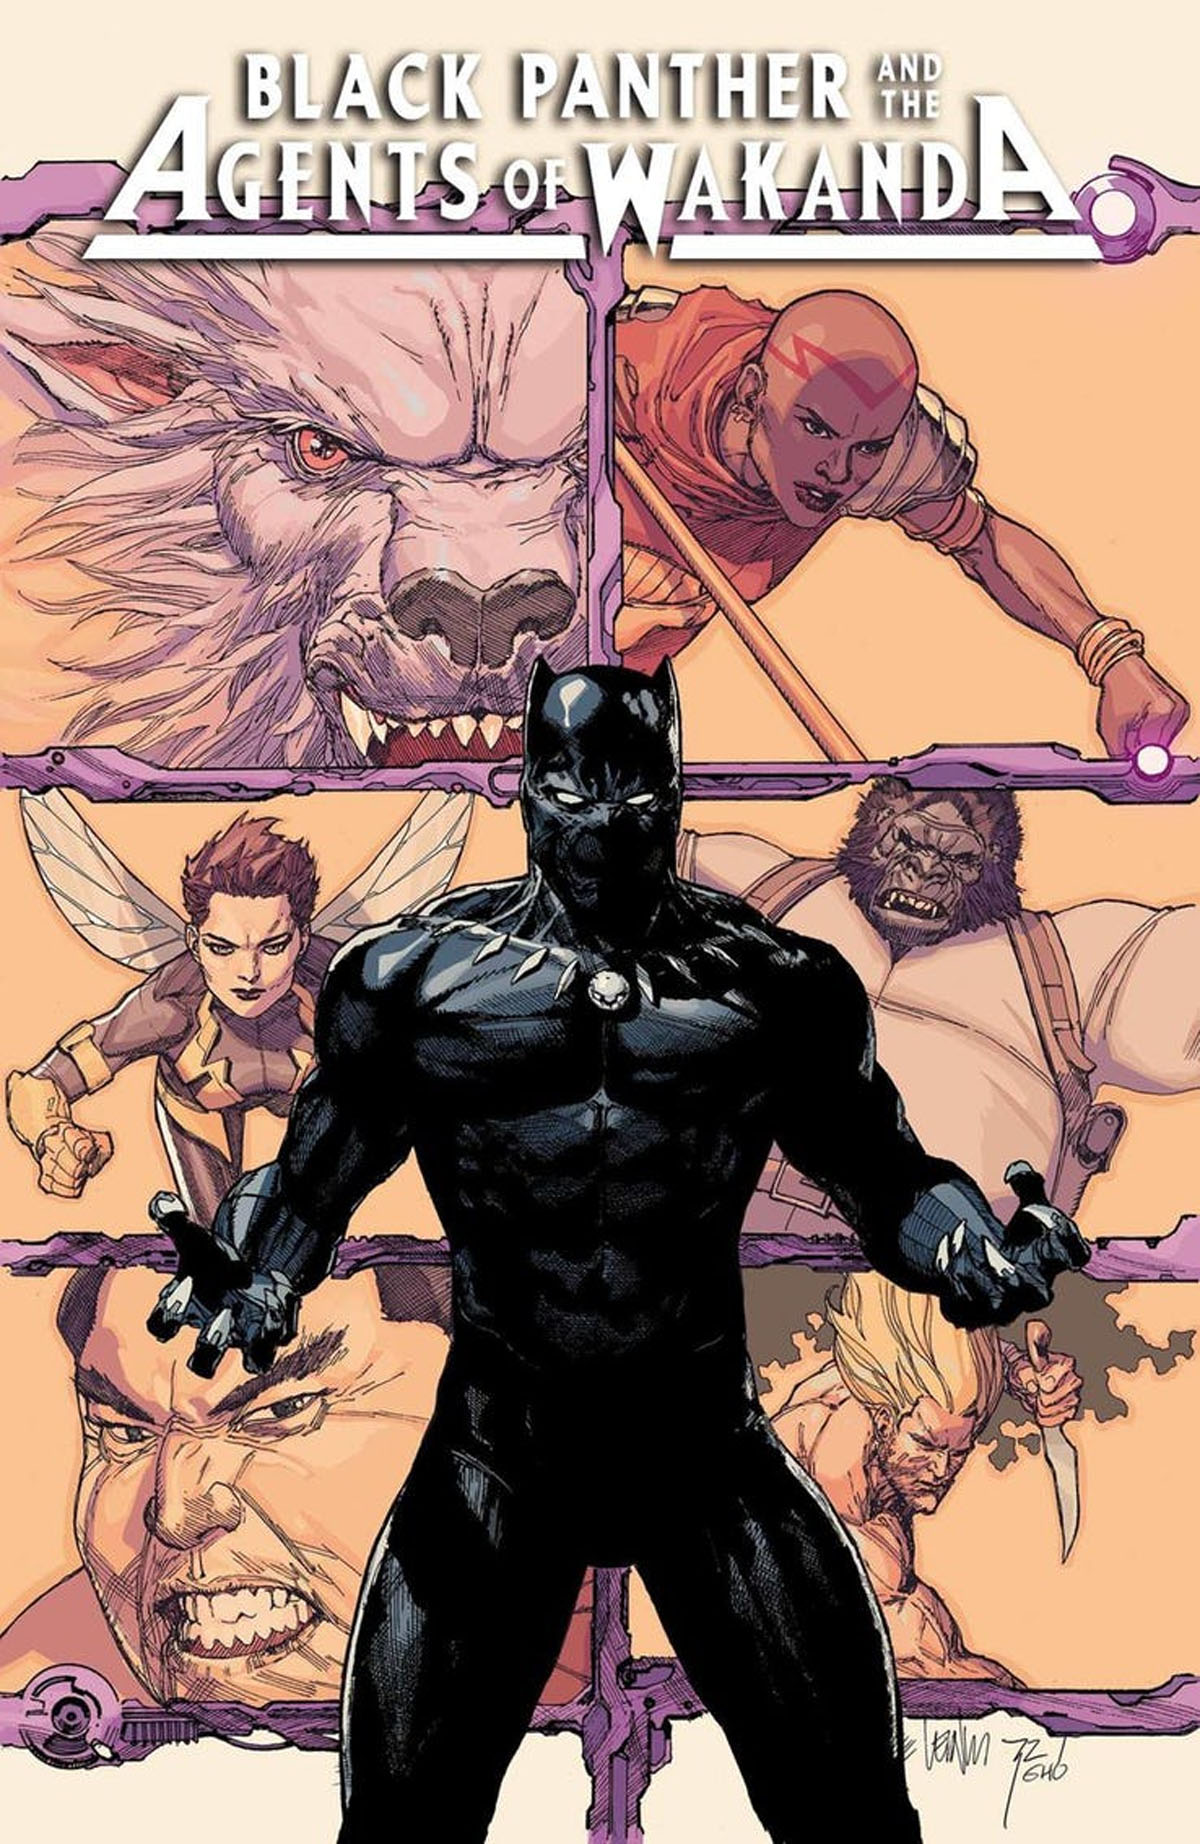 Black Panther and the Agents of Wakanda #1 cover b